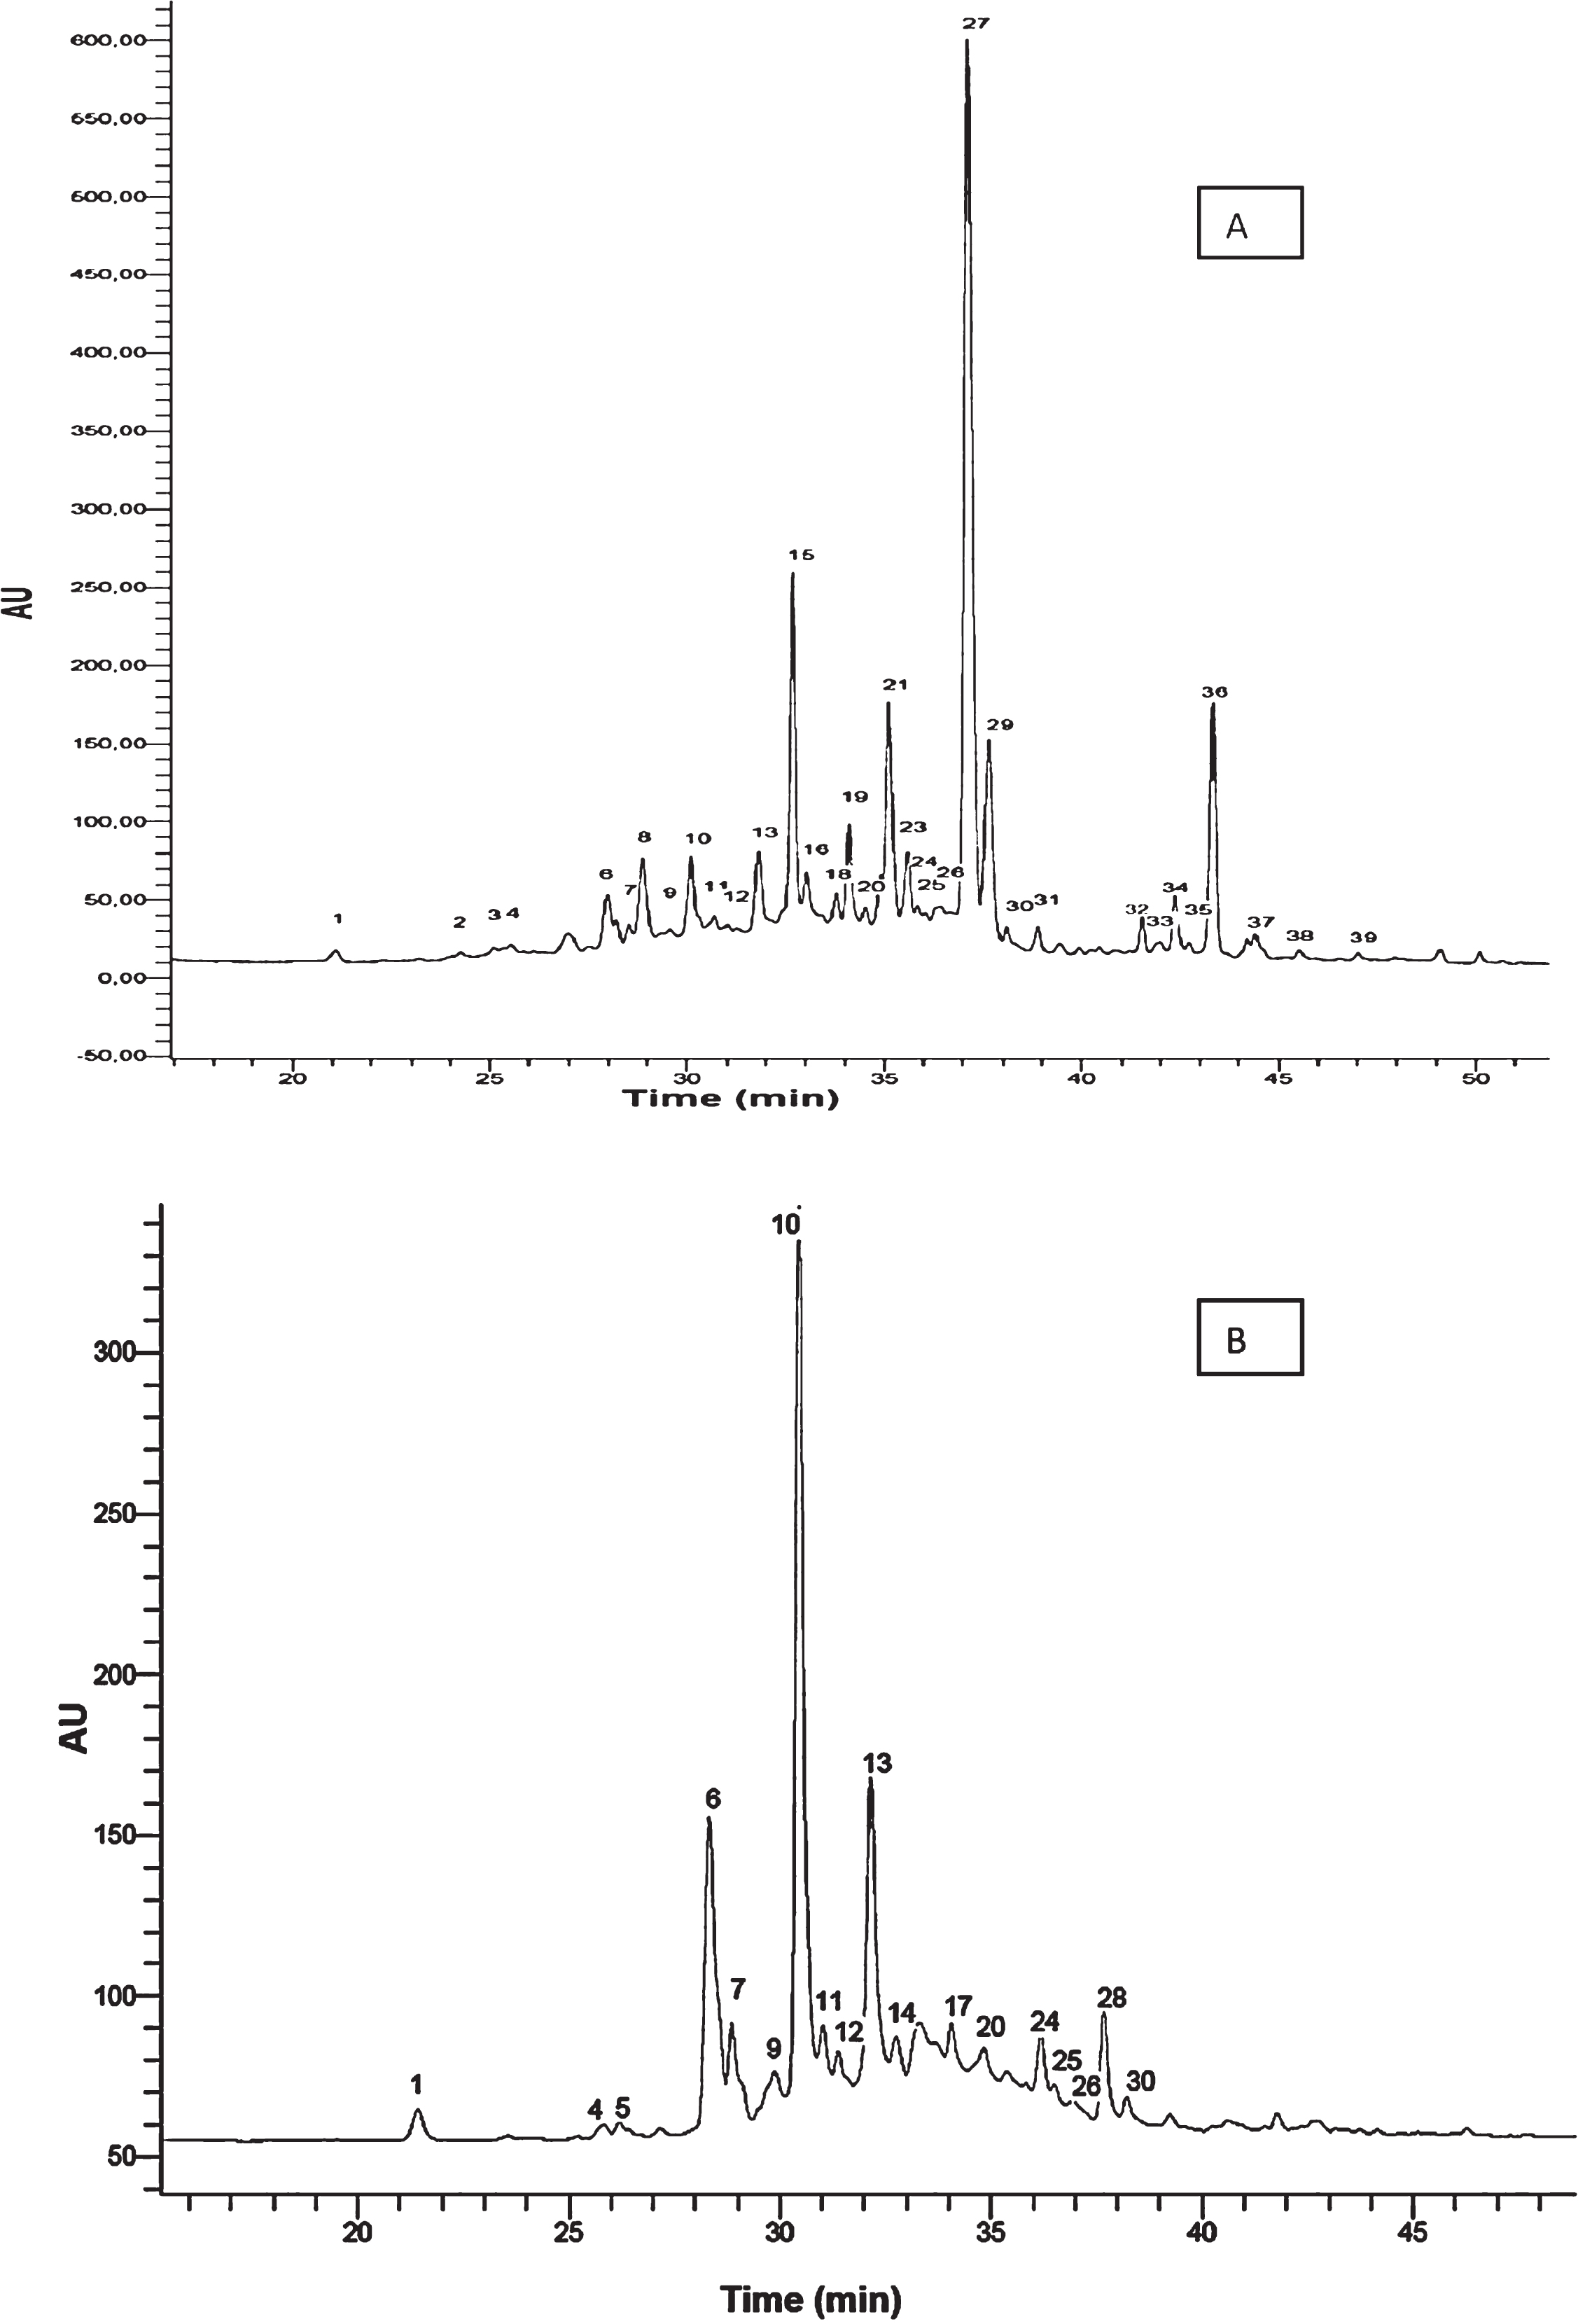 Chromatograms for strawberry cv. Camarosa. A) HPLC-DAD chromatogram obtained at 280 nm. B) HPLC-FD chromatogram. Peaks numbers refer to Table 1.